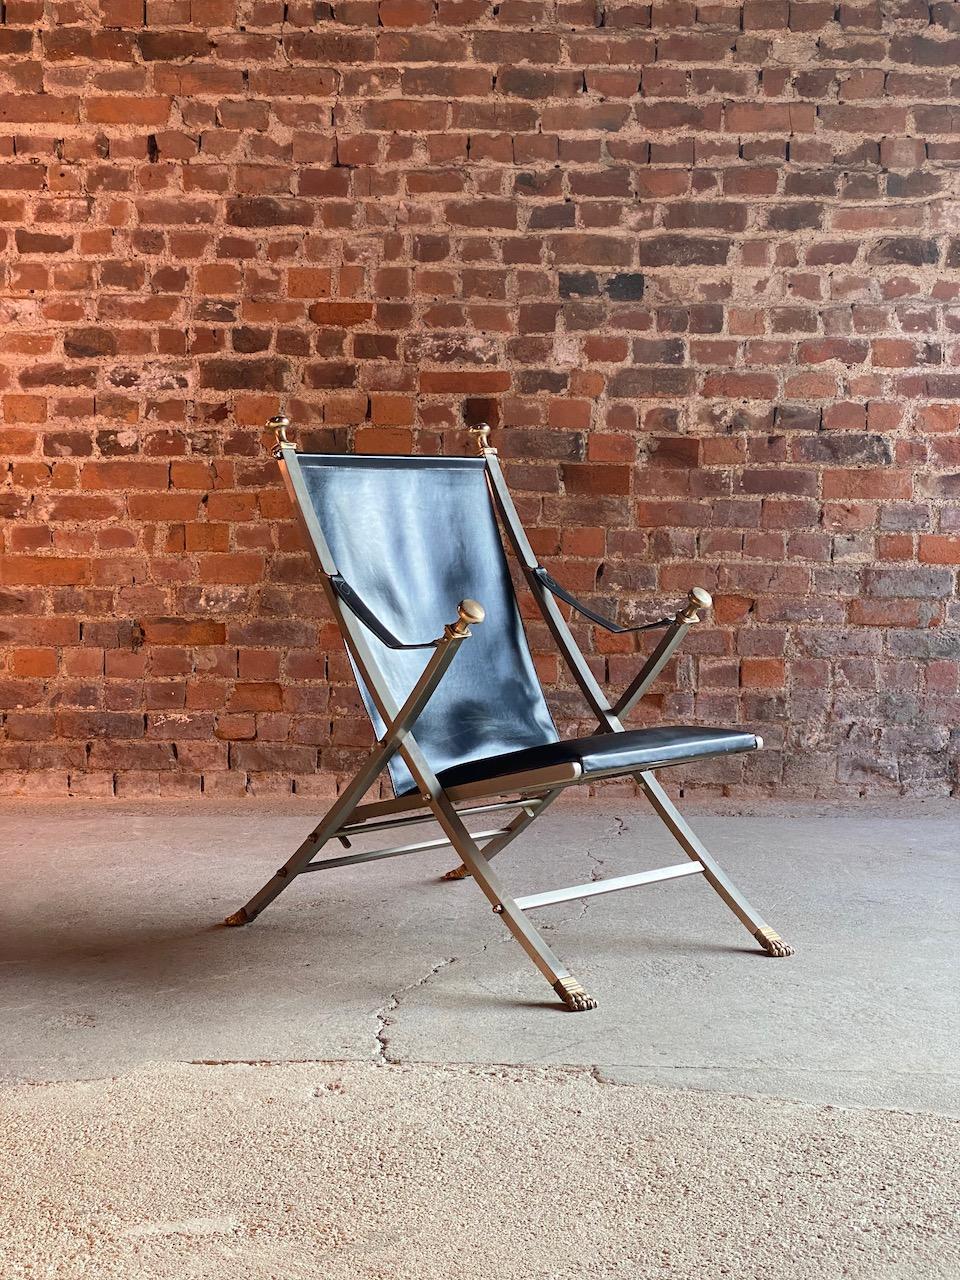 Midcentury Otto Parzinger Campaign chair by Maison Jansen, Paris, 1960

French midcentury Otto Parzinger for Maison Jansen campaign chair, Paris circa 1960, the folding neoclassical brushed solid steel frame with black leather armrests, seat and